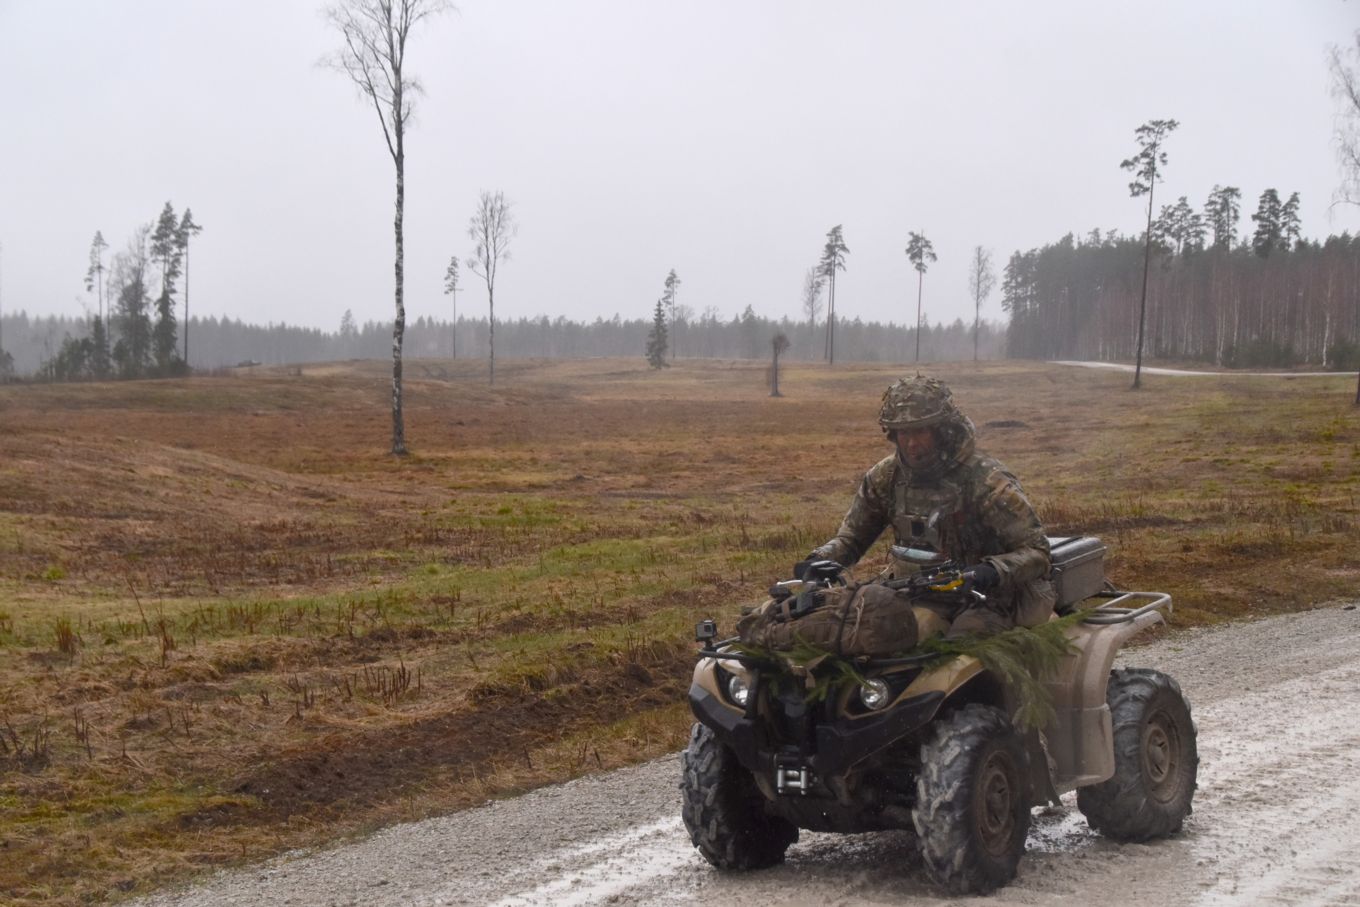 Personnel in greens driving quad bike vehicle.